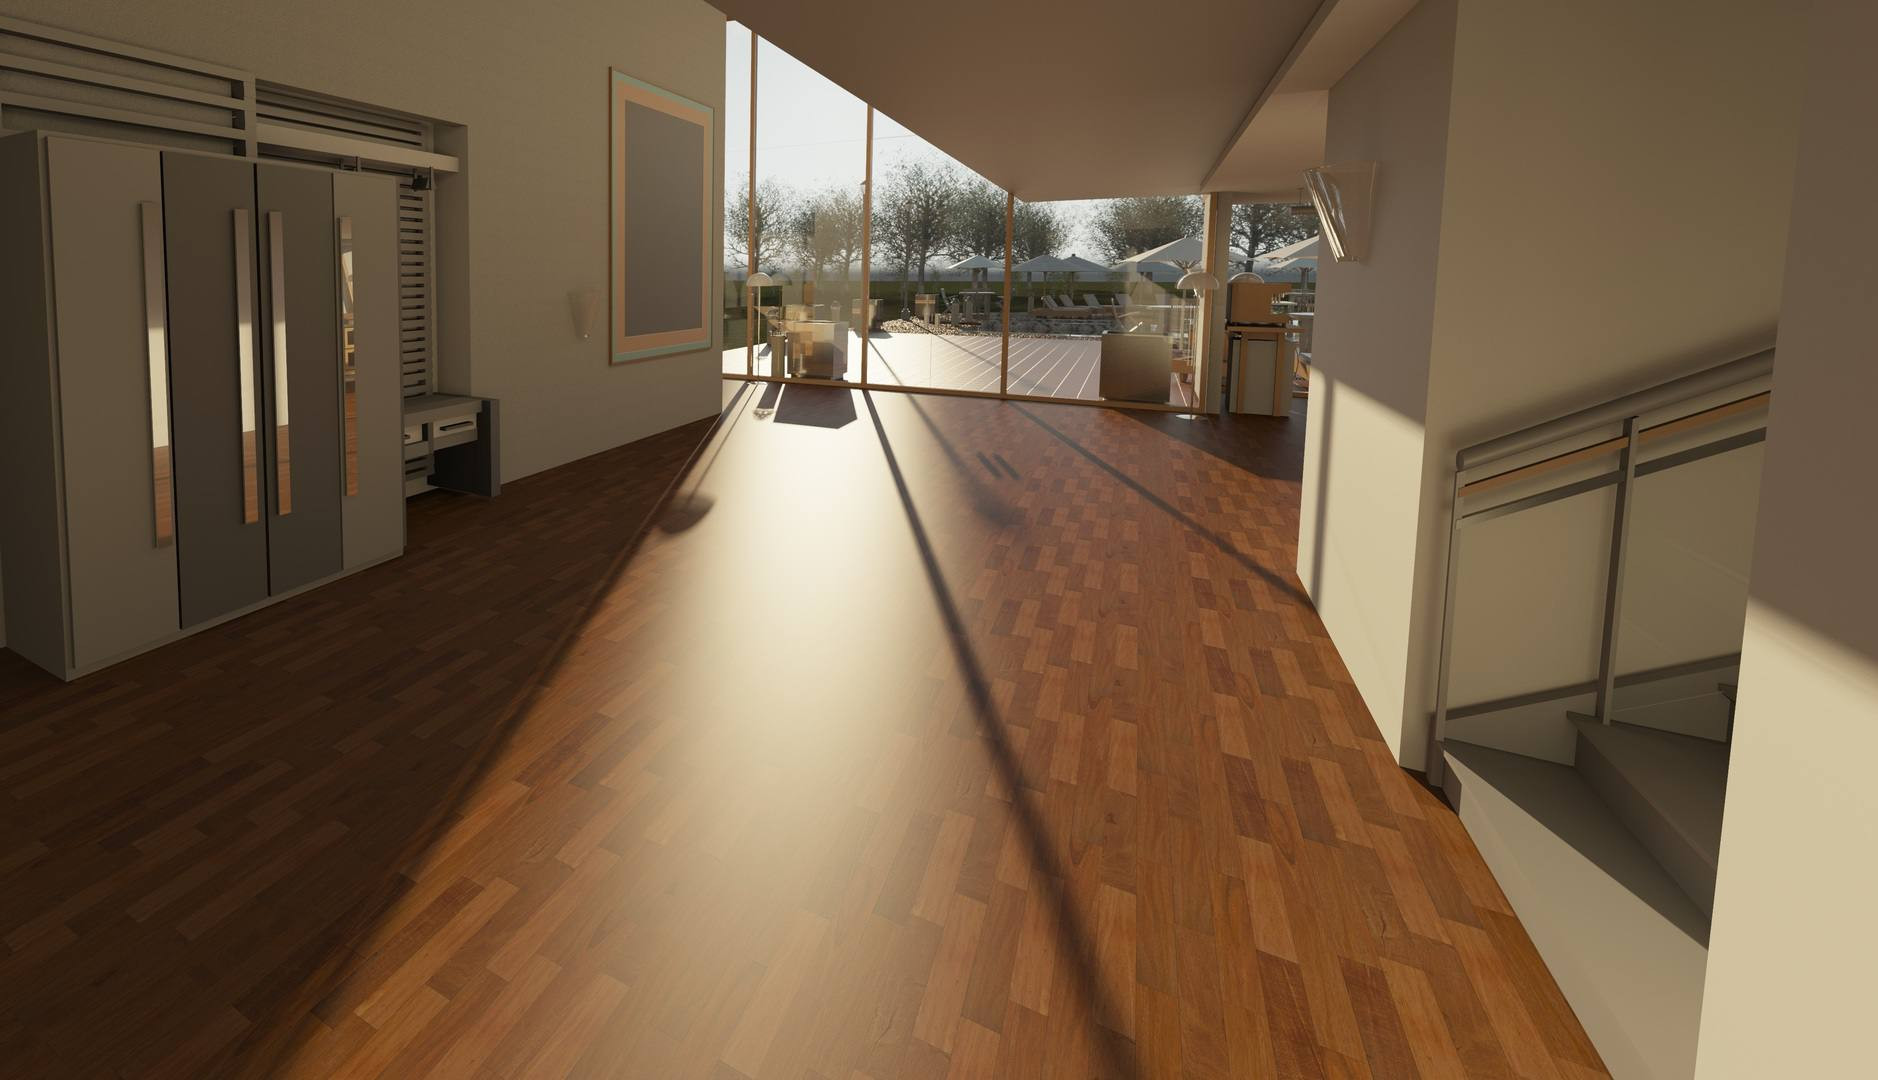 17 Nice Hardwood Floor Upgrade Price 2024 free download hardwood floor upgrade price of common flooring types currently used in renovation and building within architecture wood house floor interior window 917178 pxhere com 5ba27a2cc9e77c00503b27b